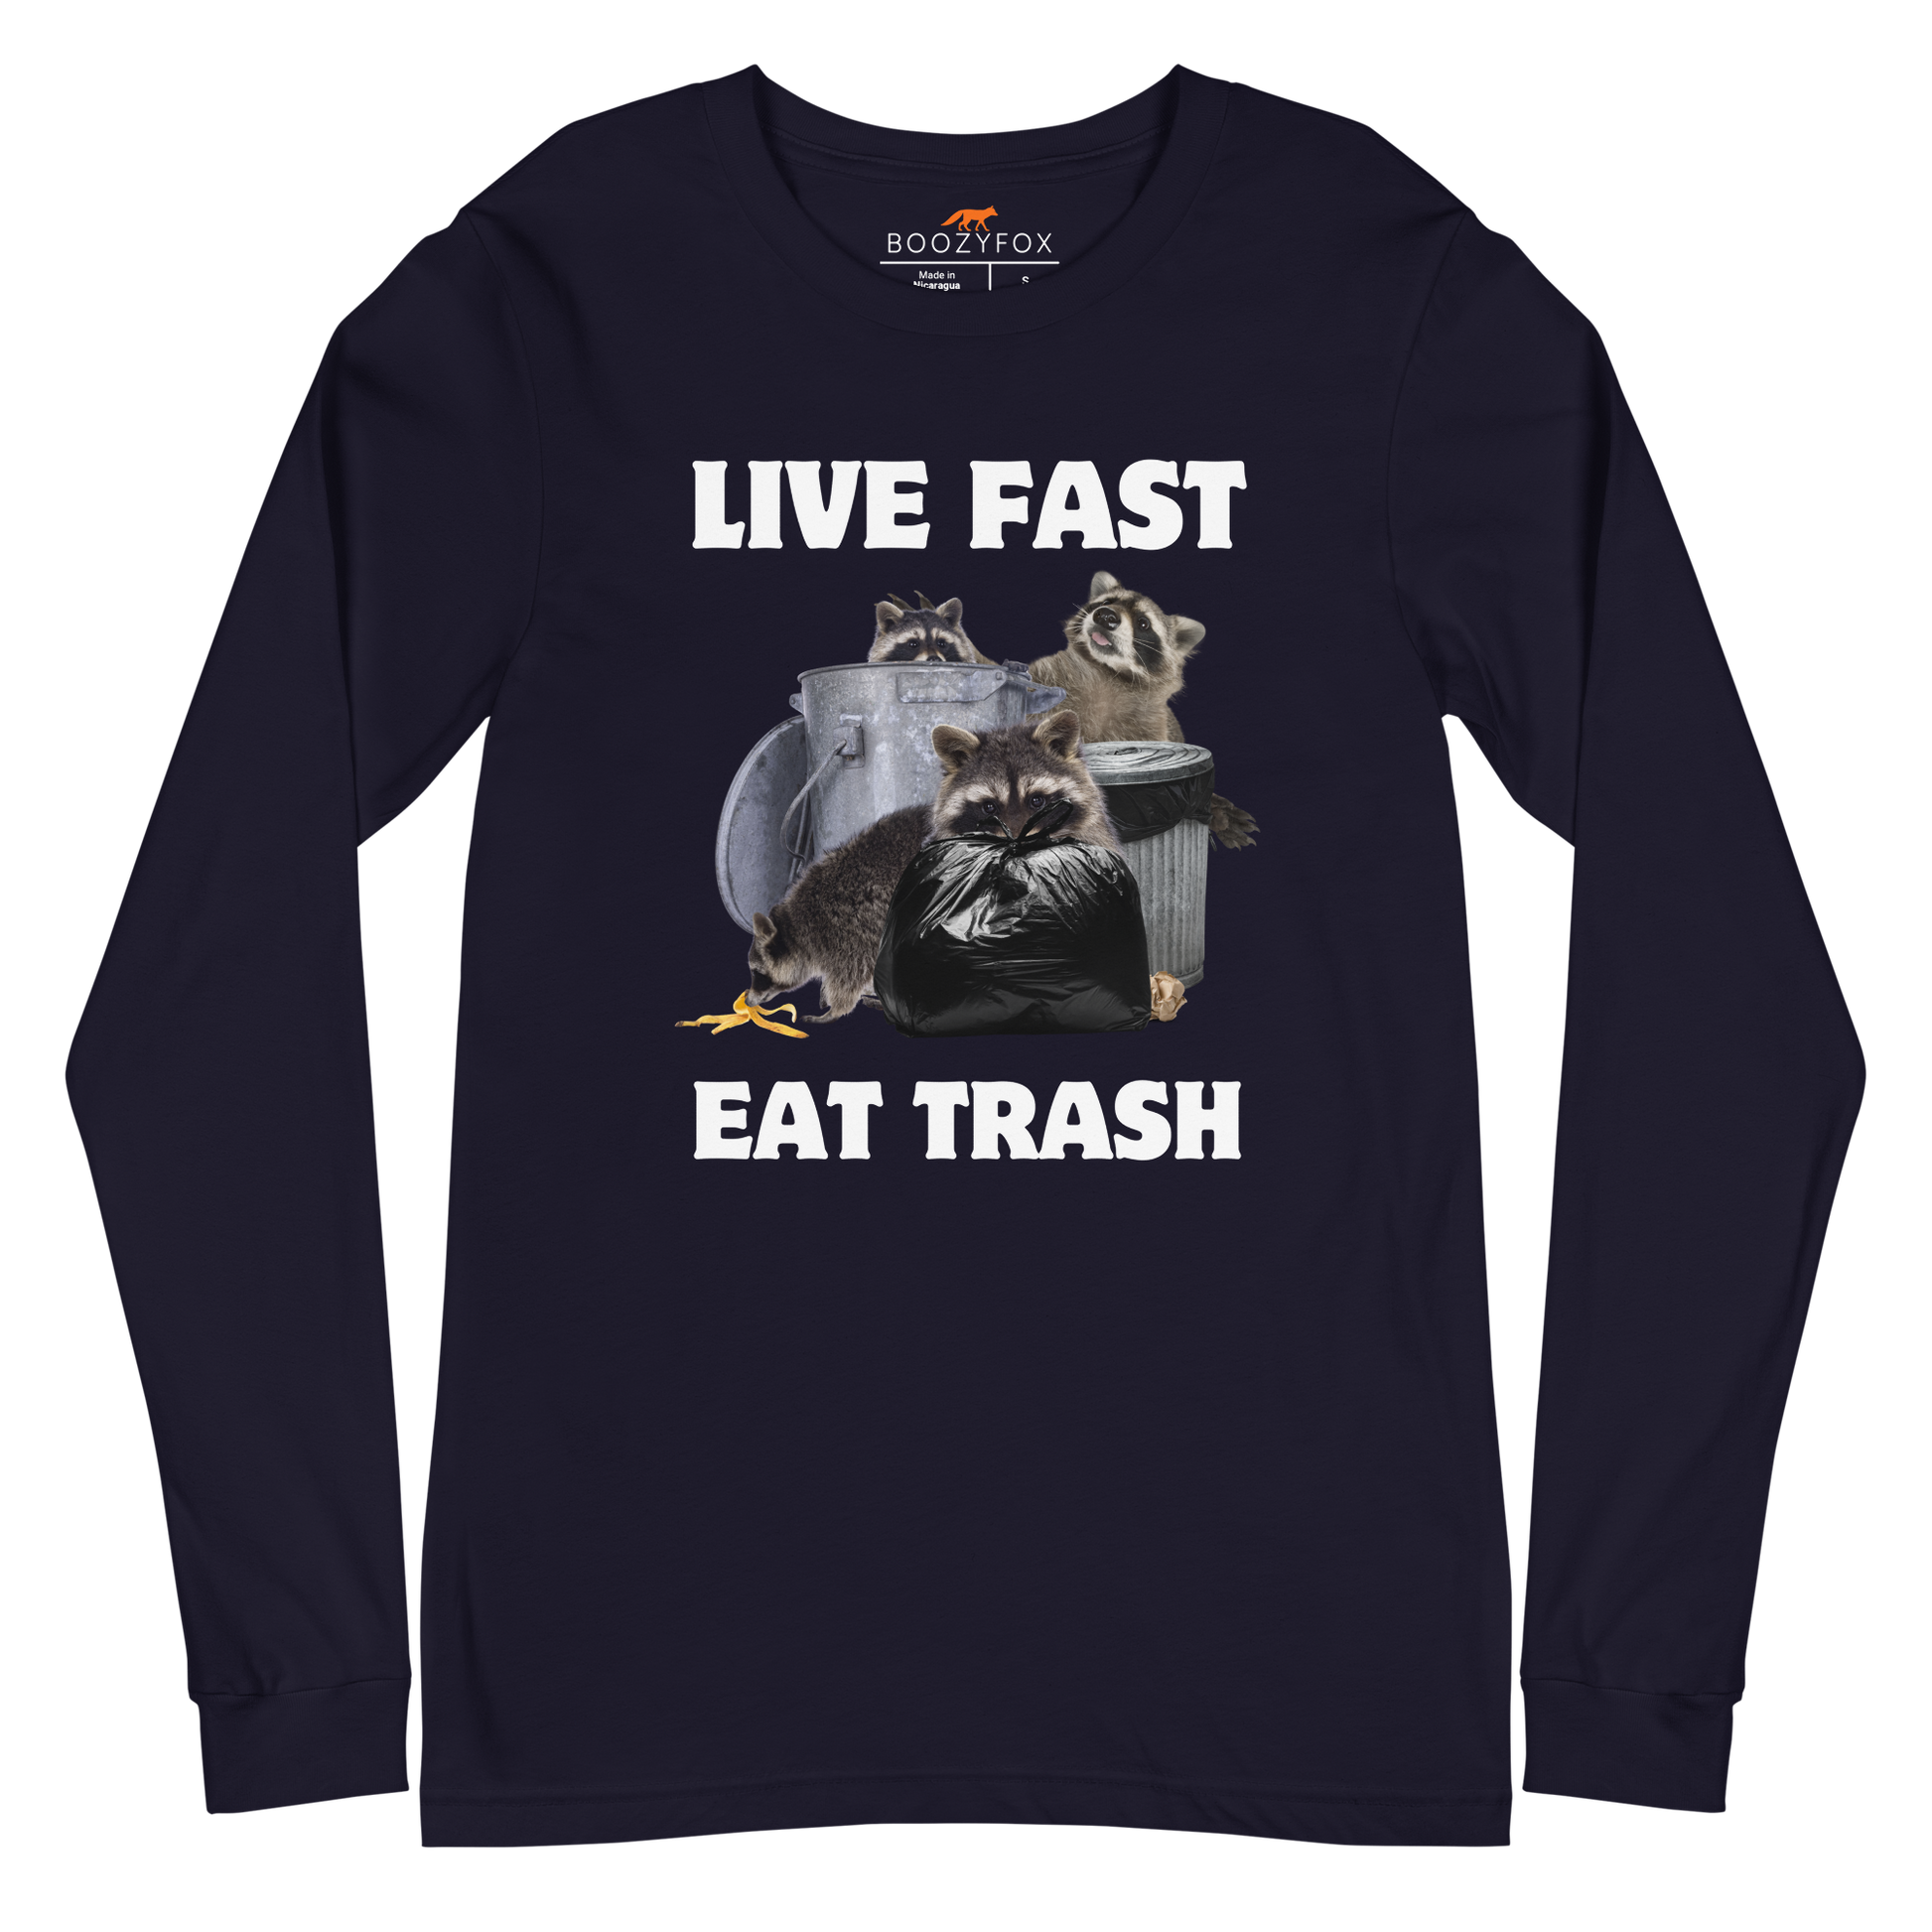 Navy Raccoon Long Sleeve Tee featuring a funny Live Fast Eat Trash graphic on the chest - Funny Raccoon Long Sleeve Graphic Tees - Boozy Fox